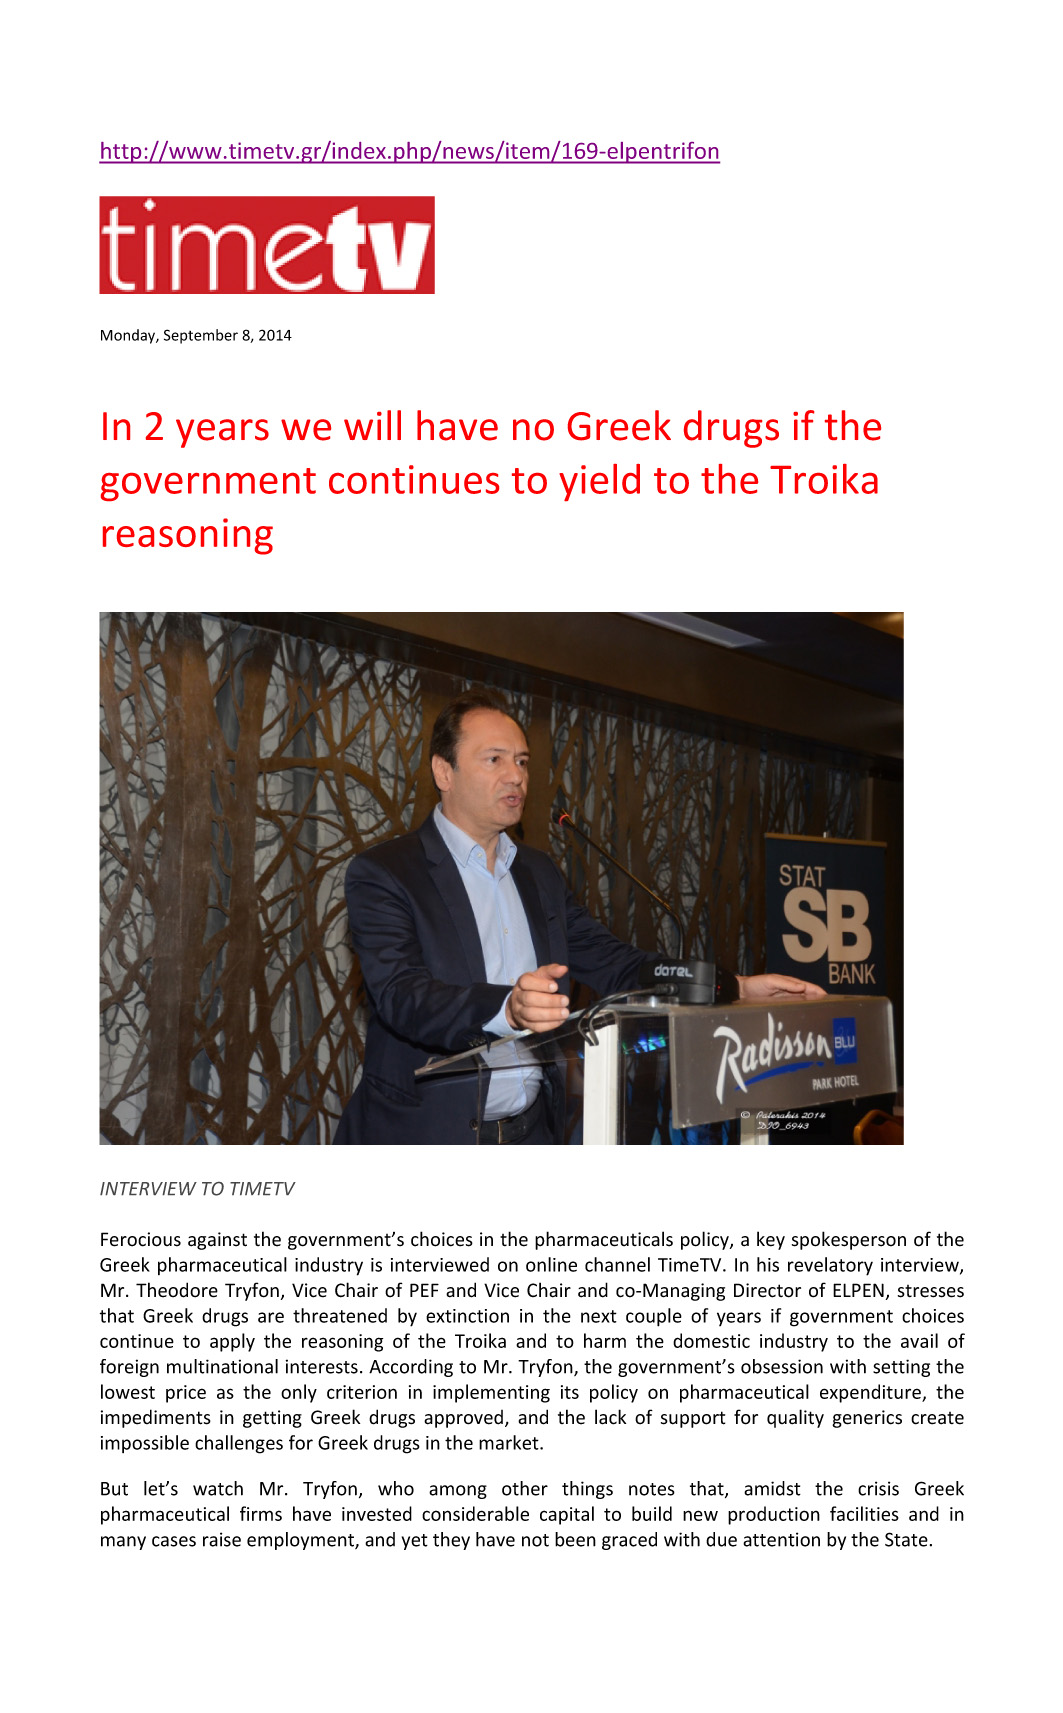 In 2 years we will have no Greek drugs if the government continues to yield to the Troika reasoning